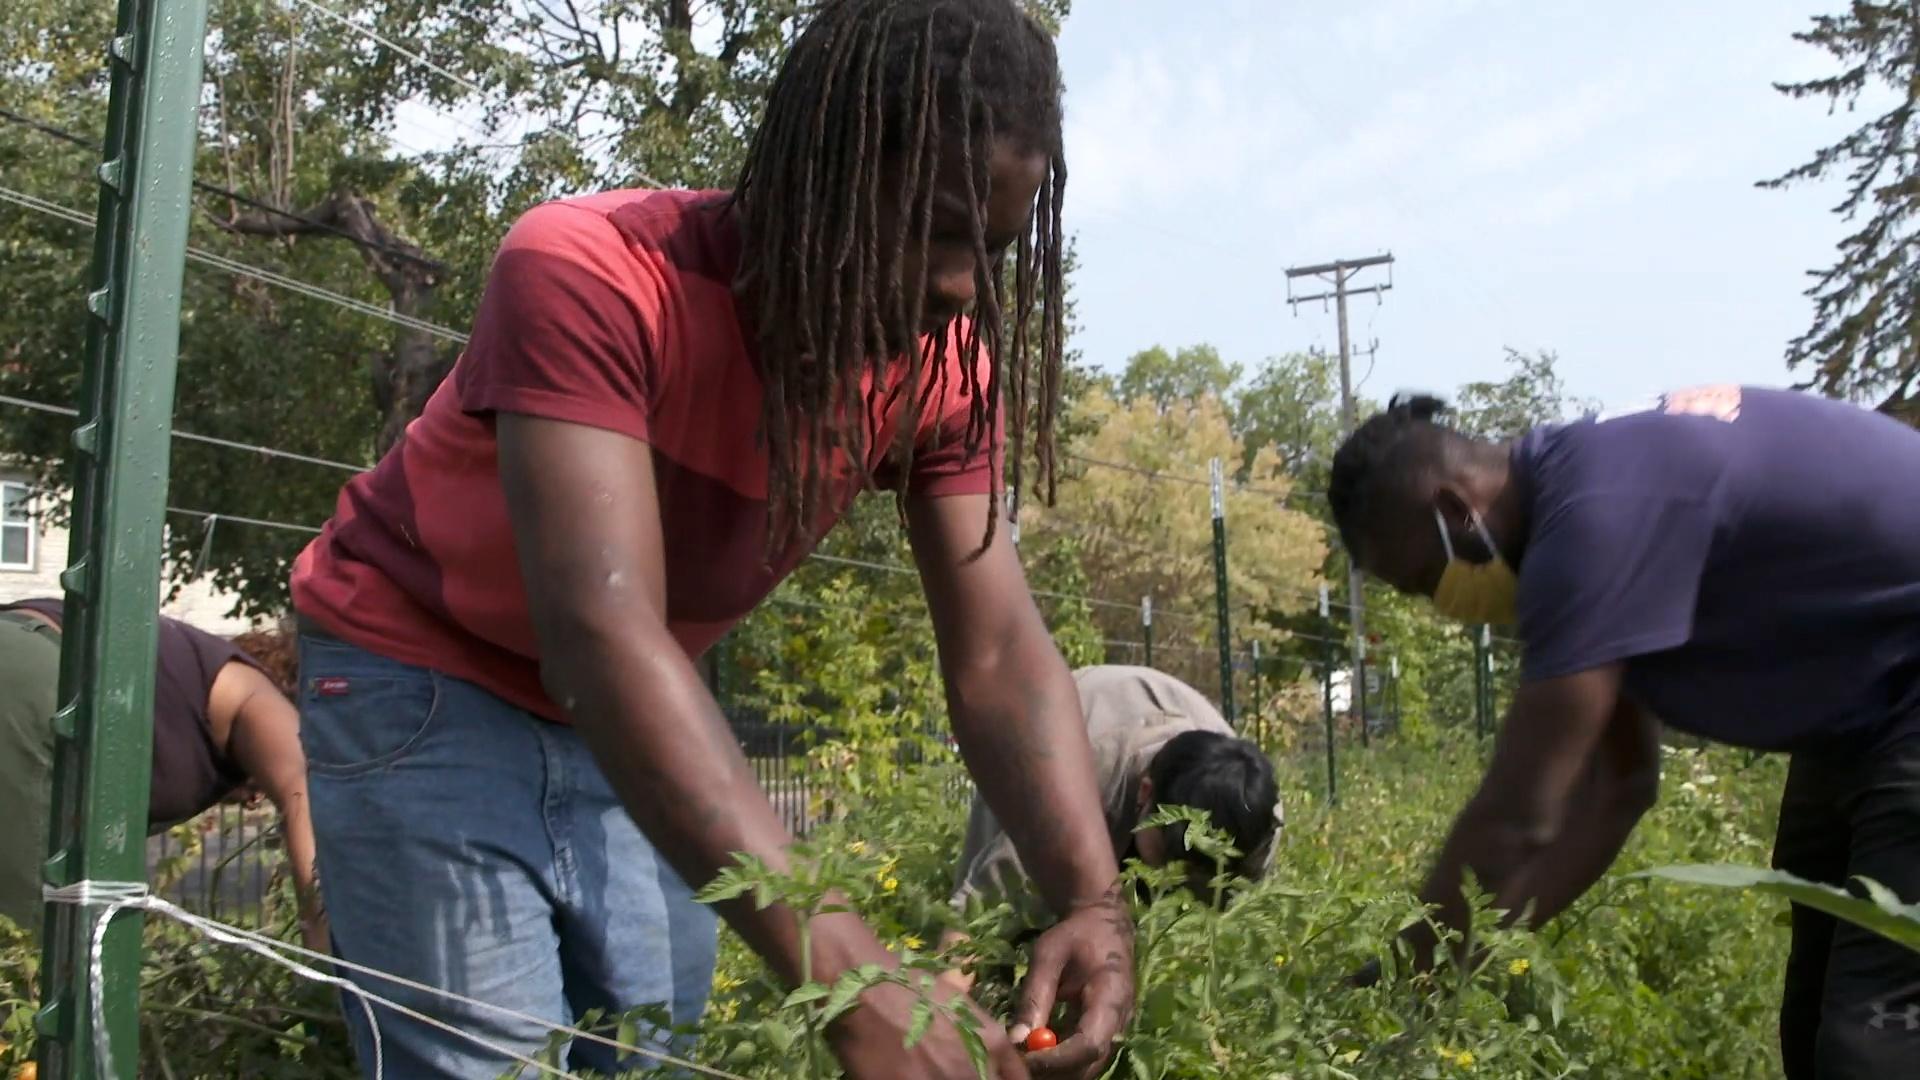 Several people pick vegetables from a community garden.